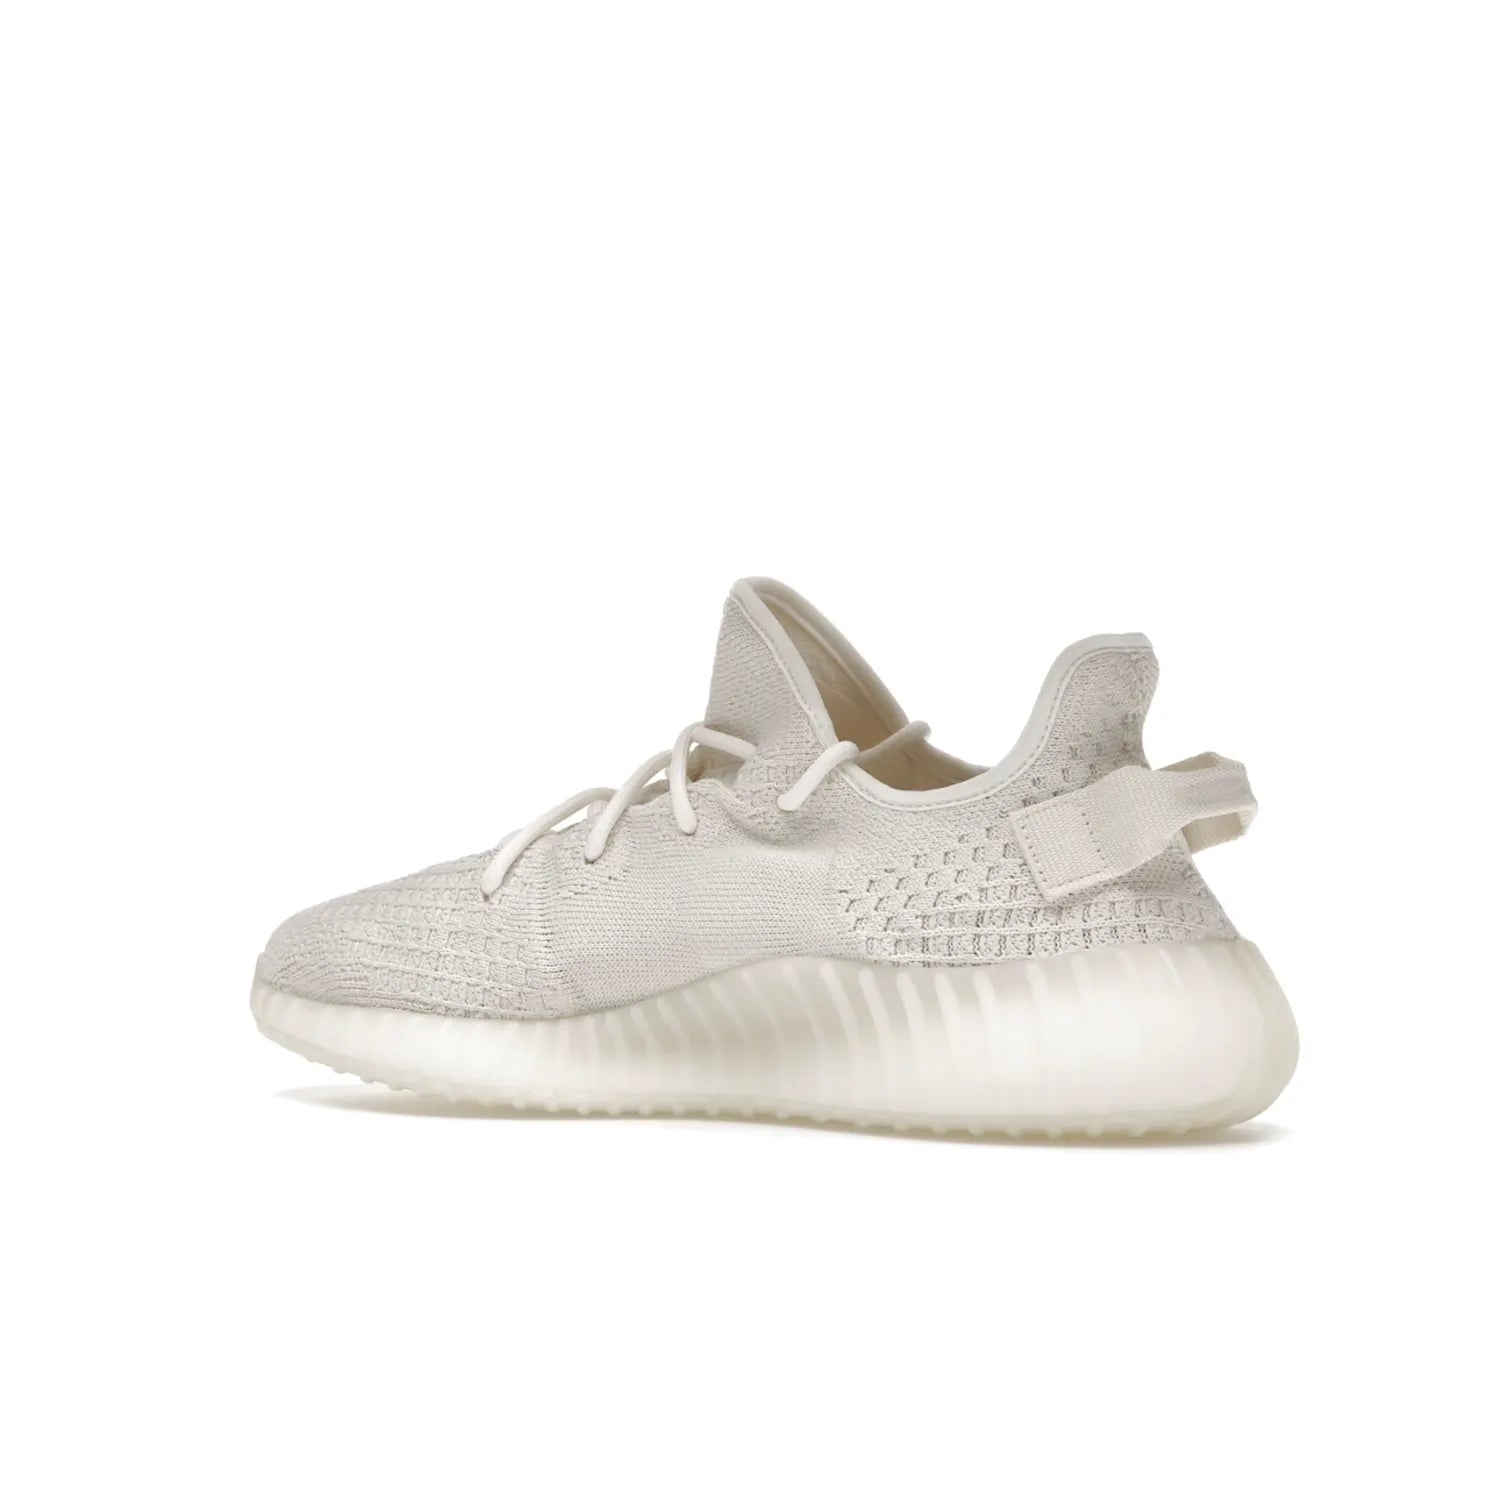 adidas Yeezy Boost 350 V2 Bone - Image 22 - Only at www.BallersClubKickz.com - Grab the stylish and comfortable adidas Yeezy Boost 350 V2 Bone in March 2022. This sneaker features a triple white Primeknit upper, mesh side stripes and canvas heel tabs, sitting atop a semi-translucent sole with Boost technology. Sure to keep your feet comfortable and stylish!